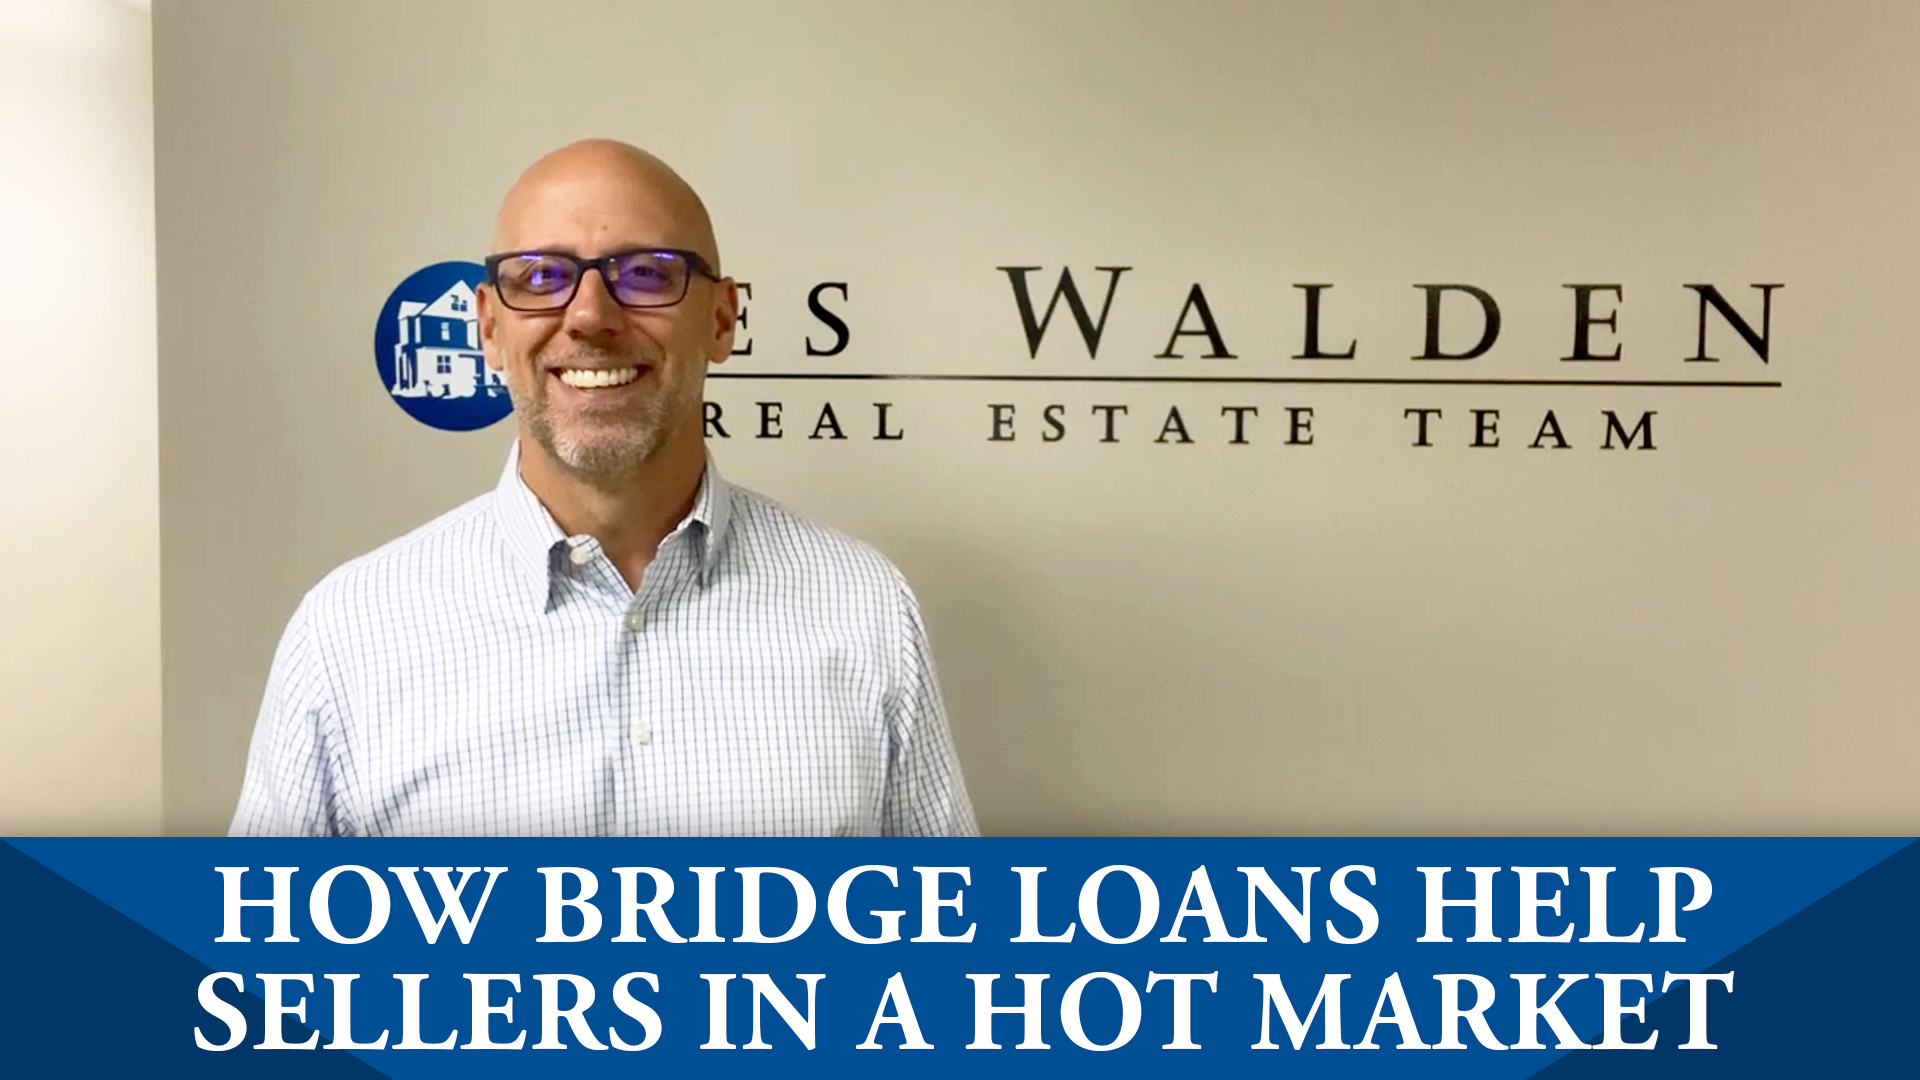 How Bridge Loans Help Sellers Find New Homes in a Hot Market